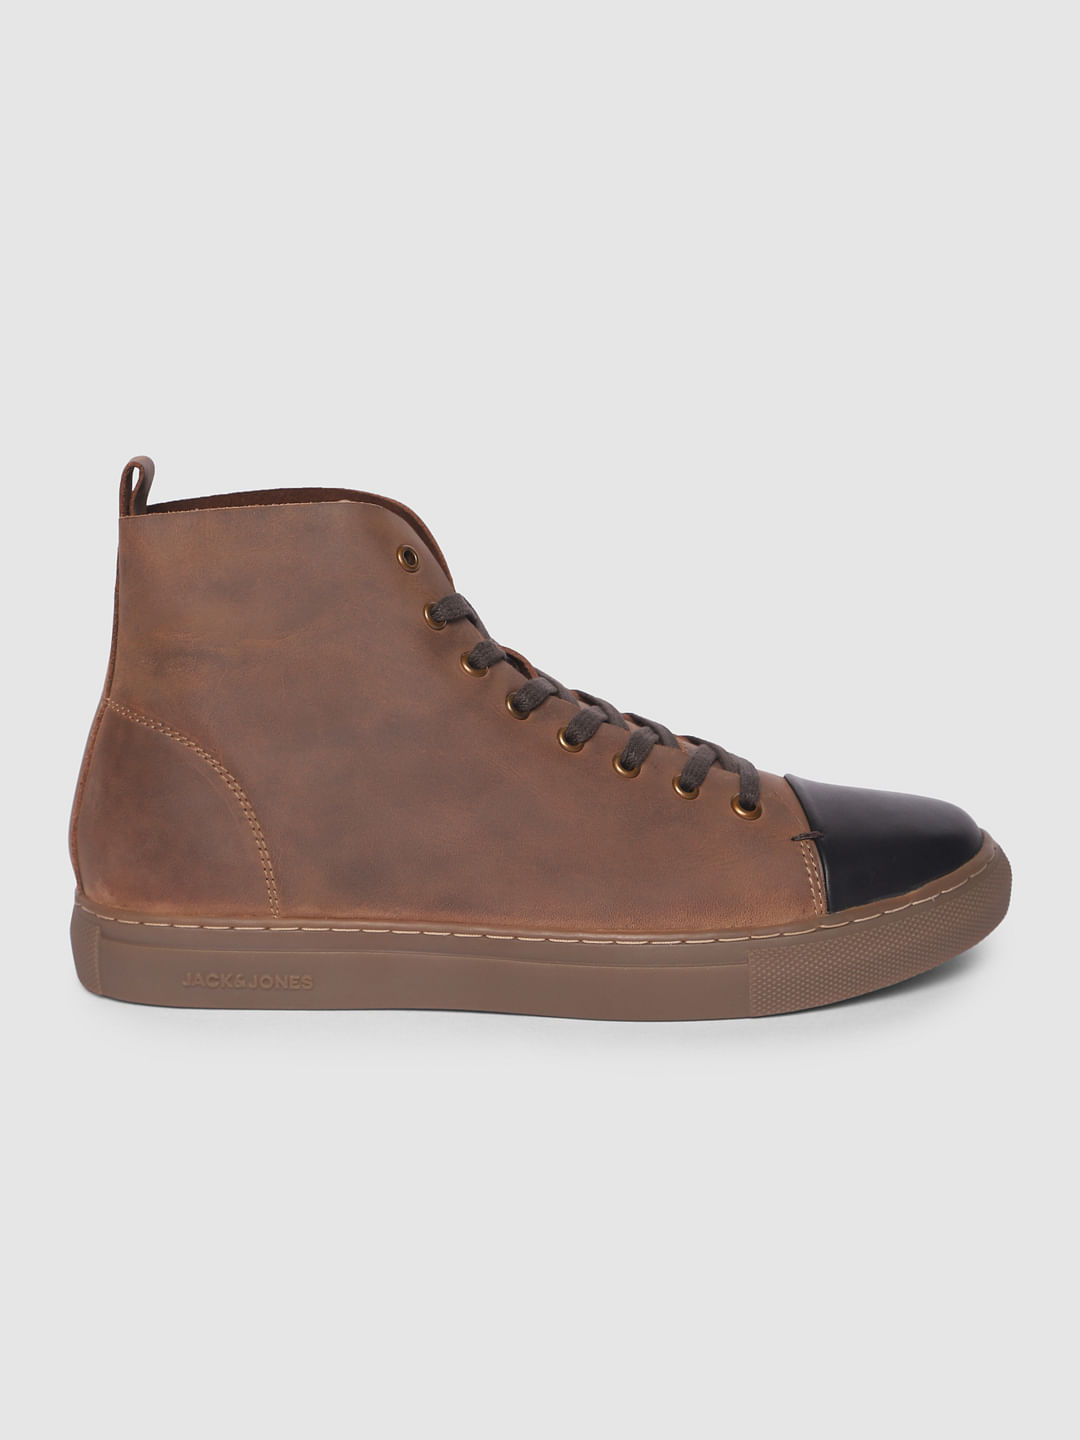 buy leather boots online